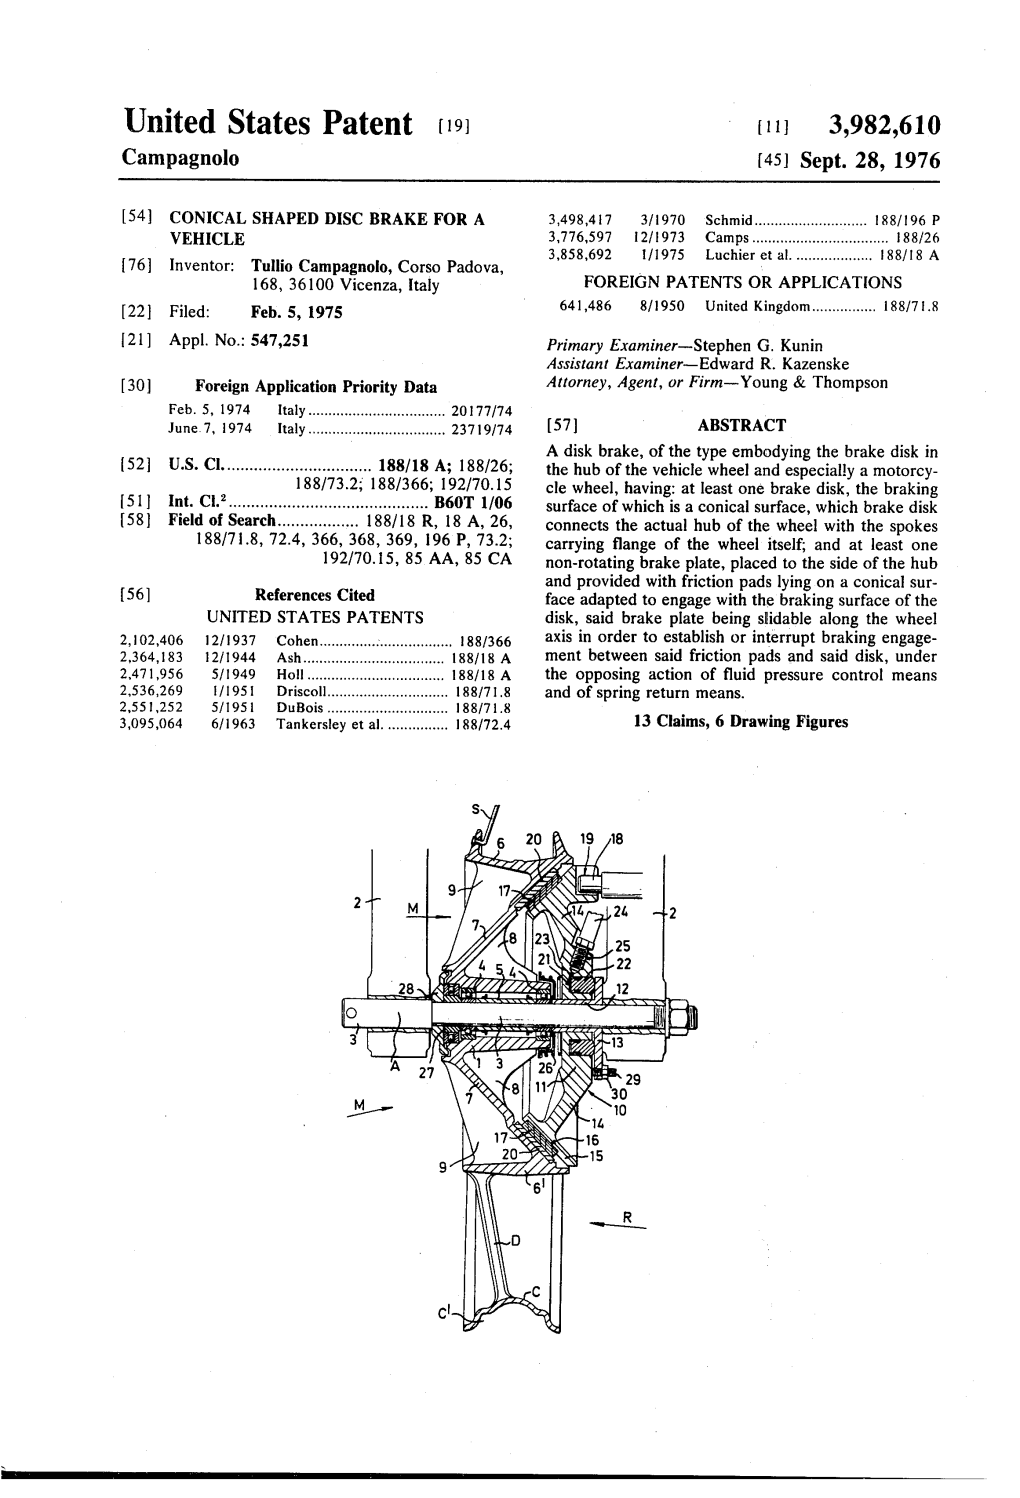 United States Patent (19) 11) 3,982,610 Campagnolo (45) Sept